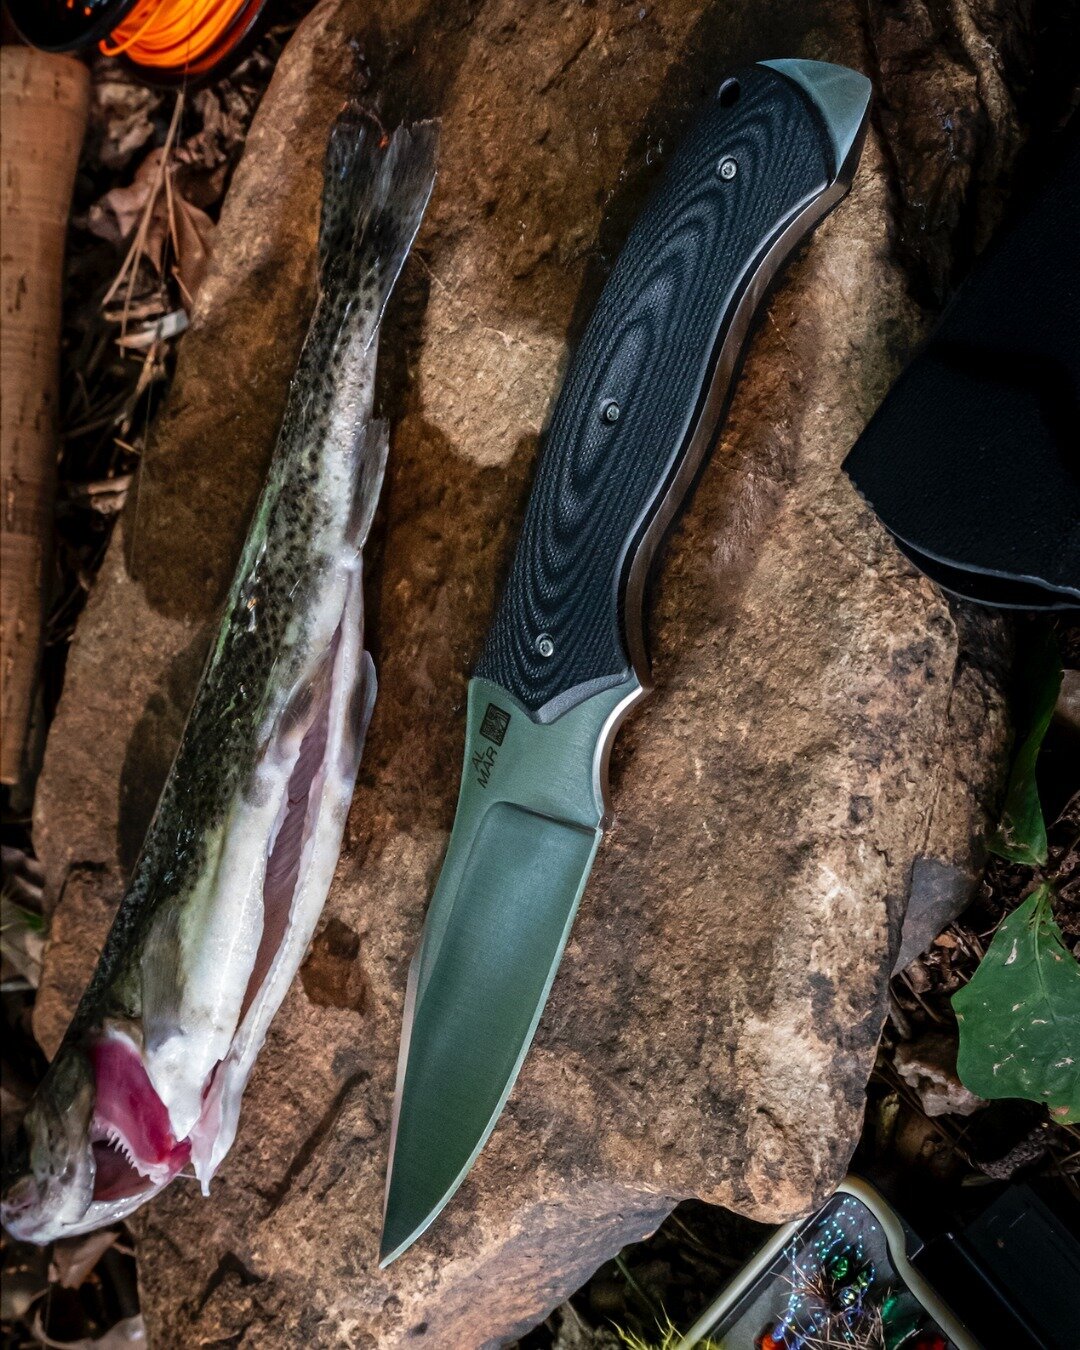 Distinctive by design, exceptional by nature. Check out our newest 4.25&quot; B-21 Fixed Blade.

#knife #knives #knifelife #everydaycarry #handmade #knifecut #knifemaker #knifemaking #blade